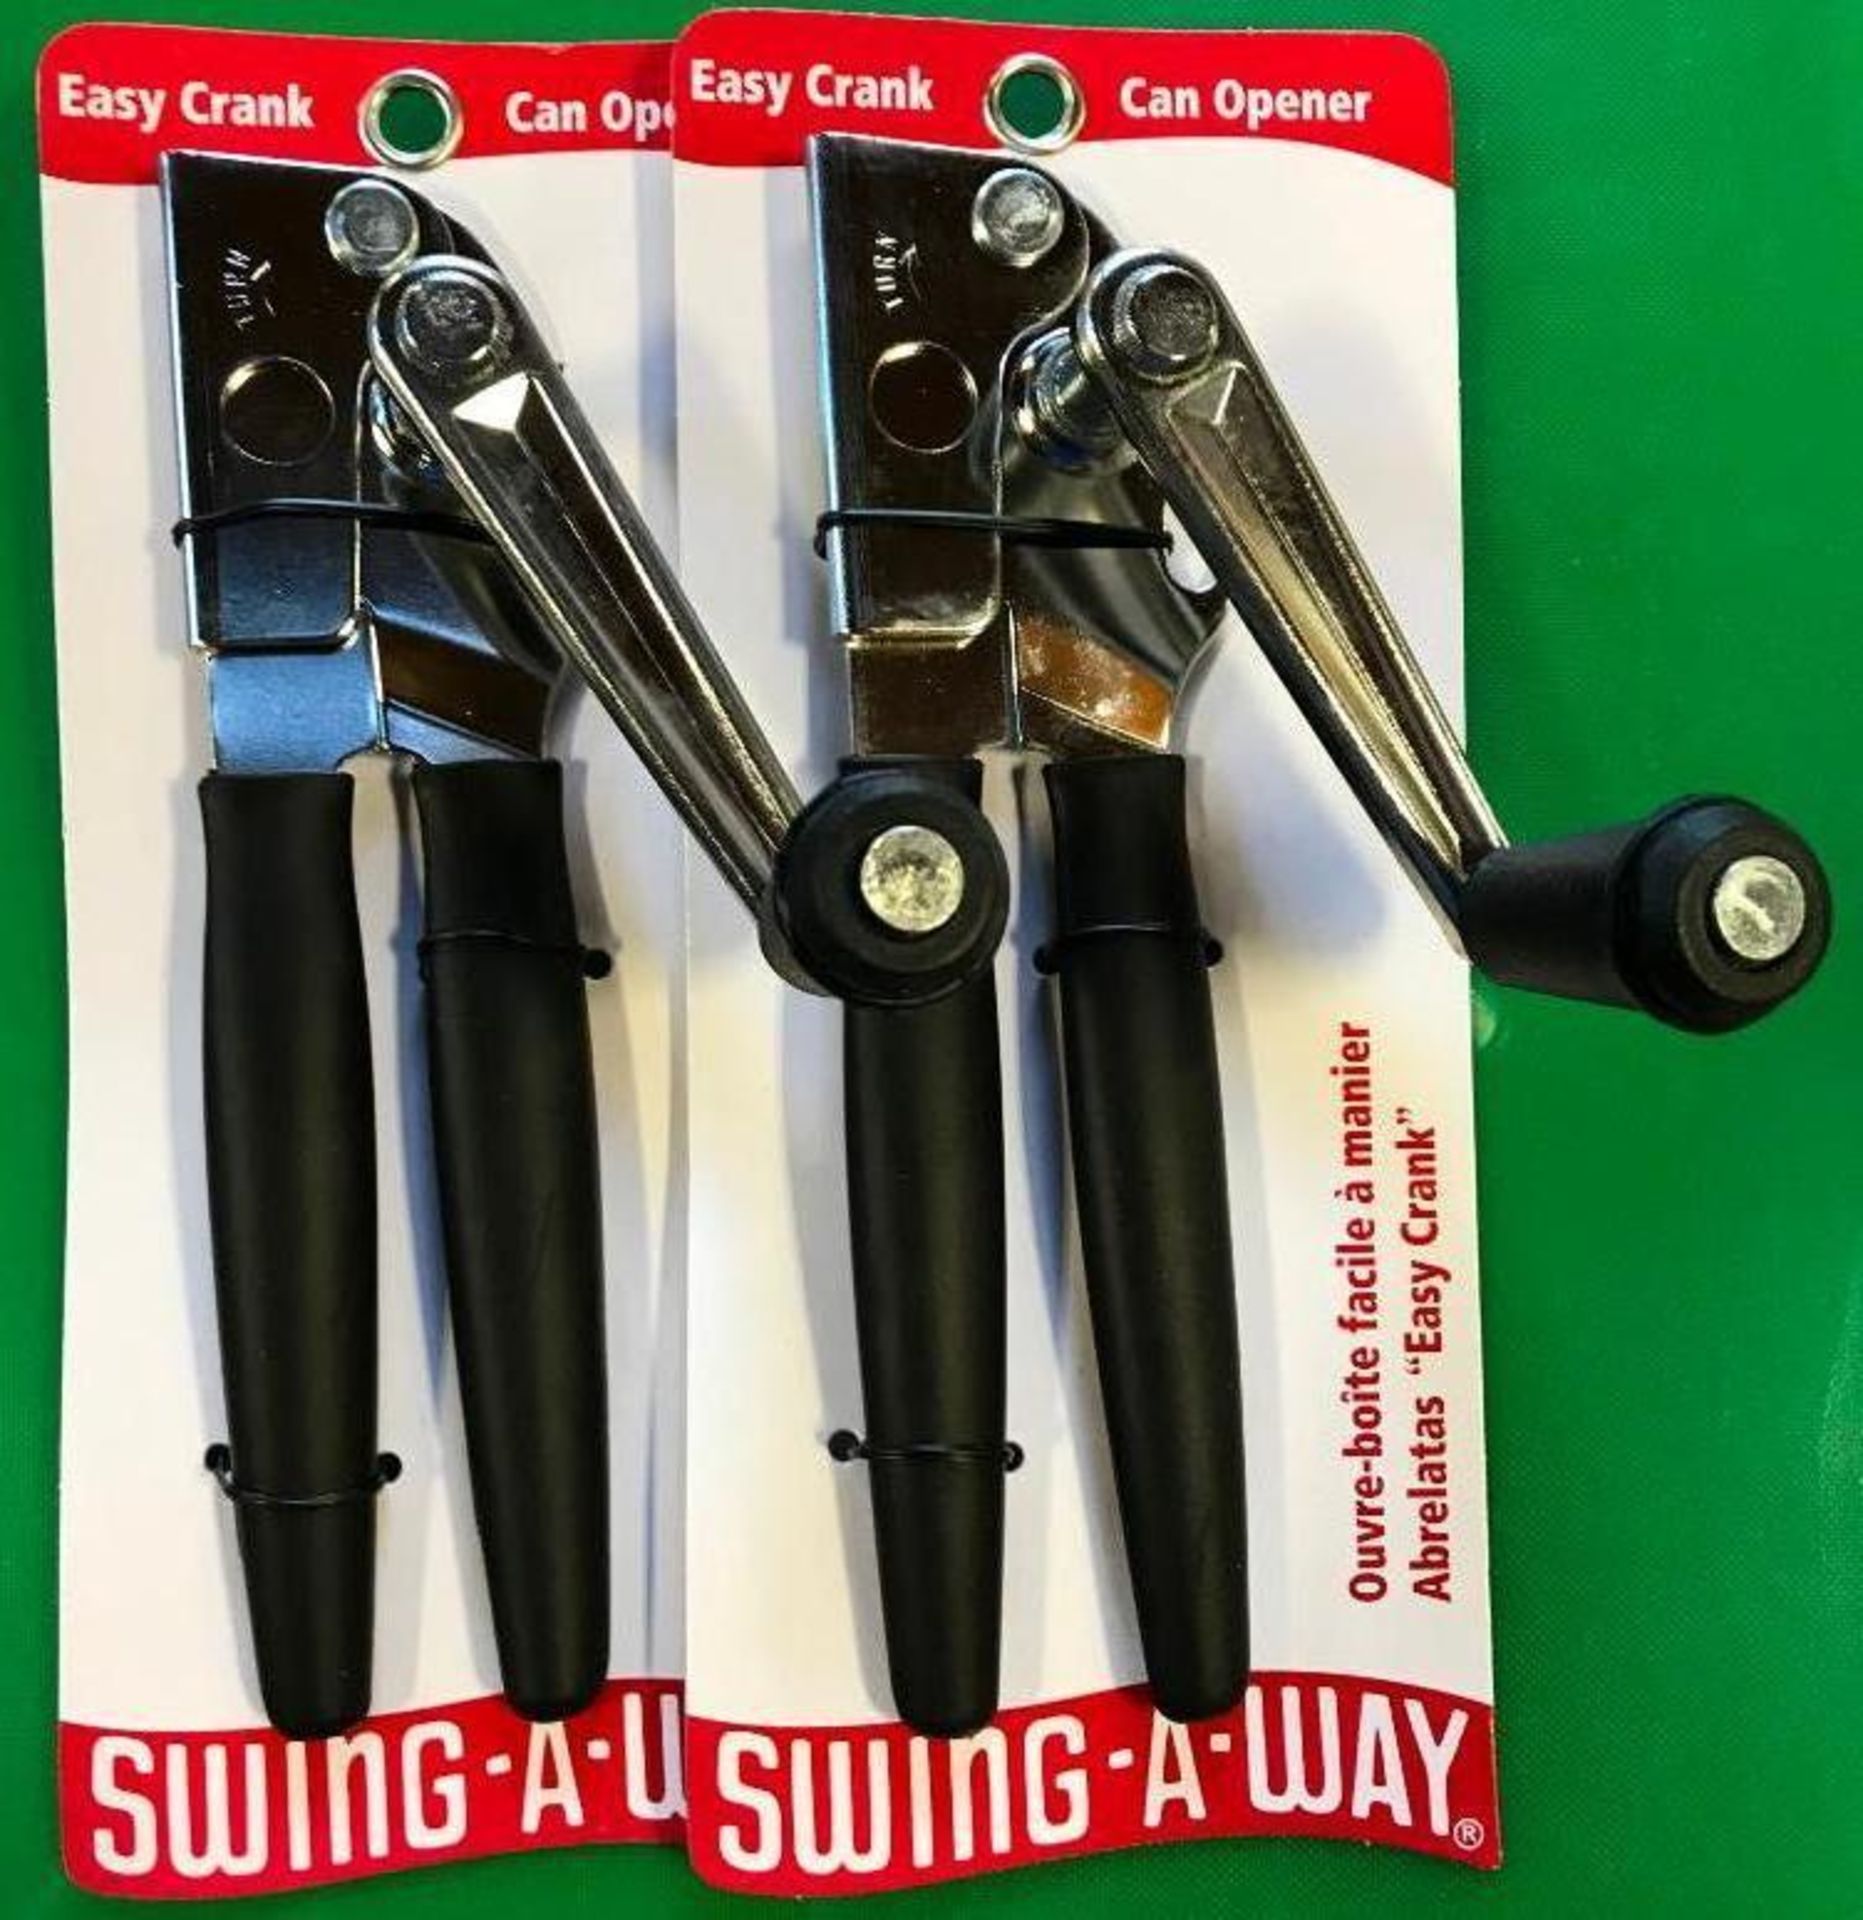 SWING-A-WAY EASY CRANK CAN OPENER, FOCUS 6090 - LOT OF 2 - NEW - Image 3 of 3